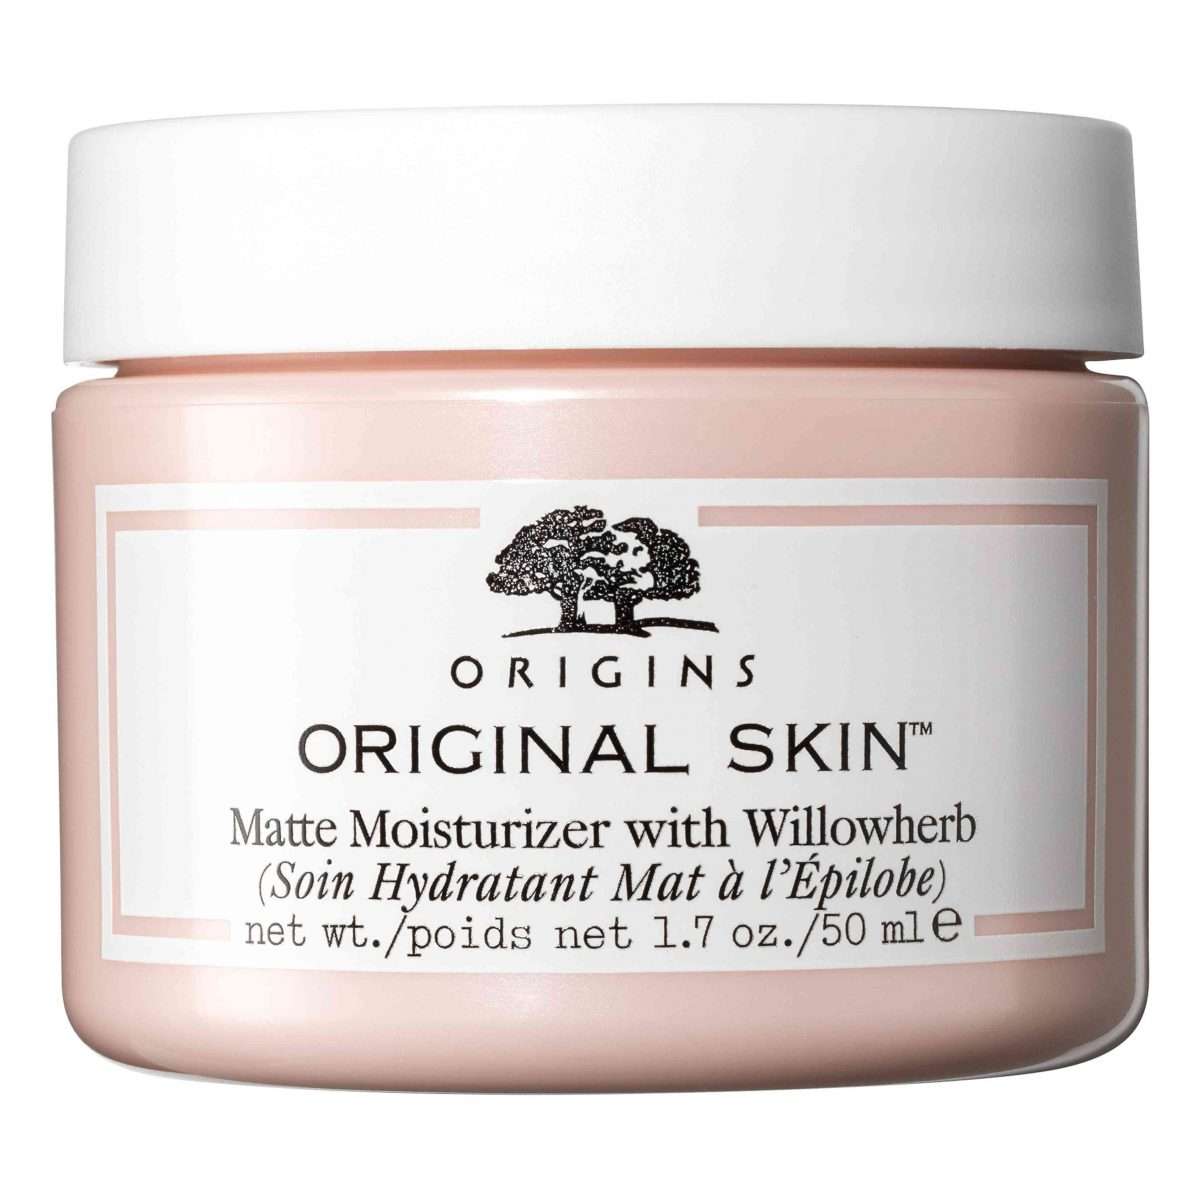 The 7 Best Moisturizers for Oily Skin in 2020